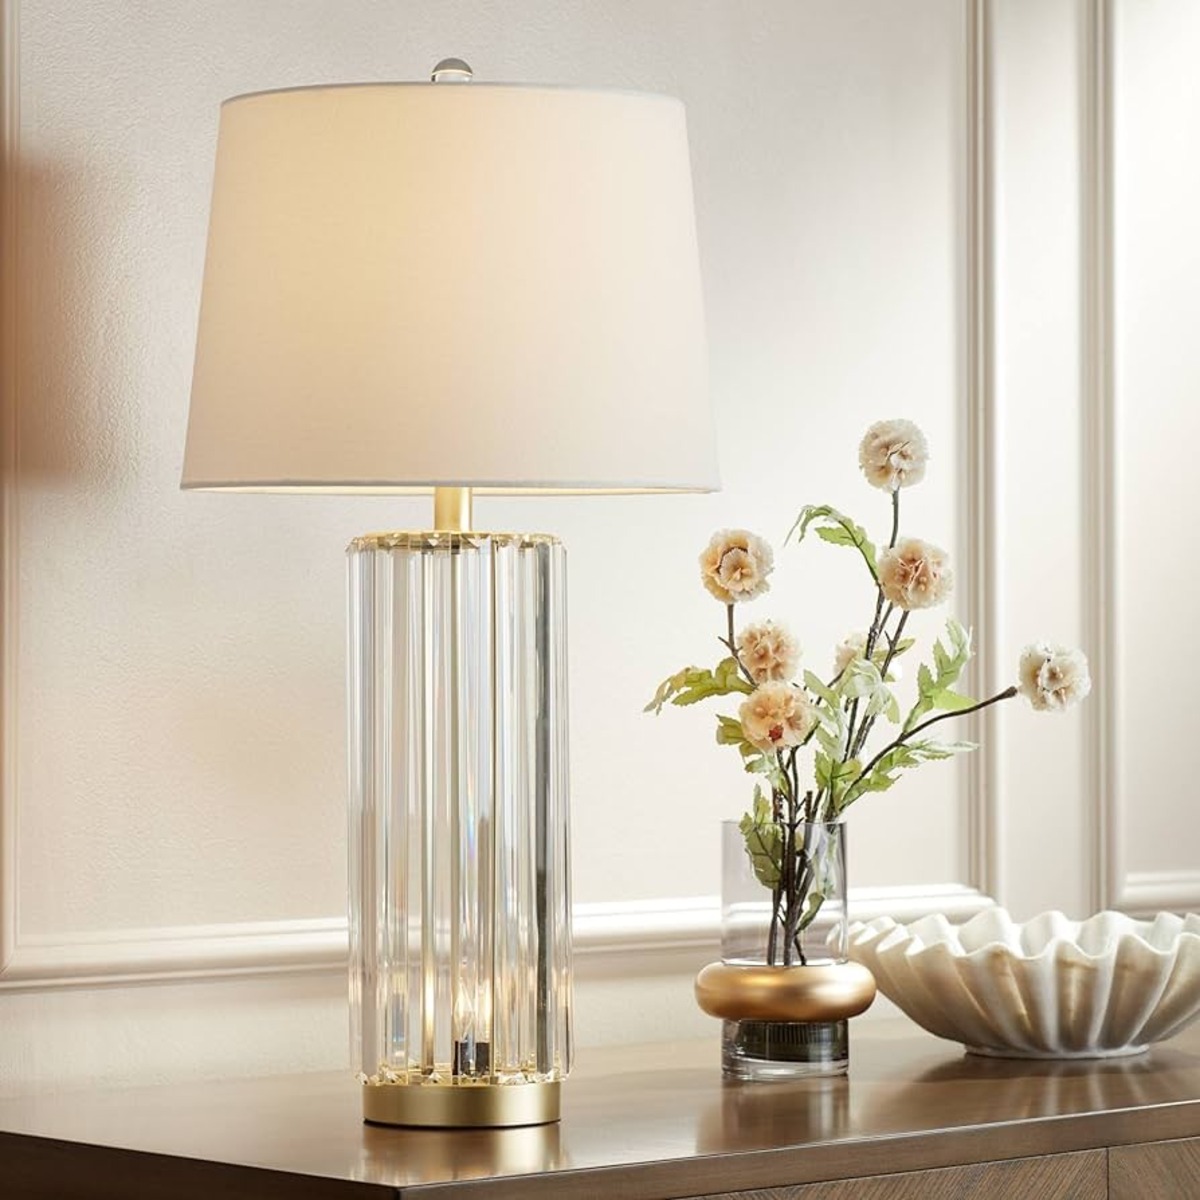 How To Fix A Table Lamp